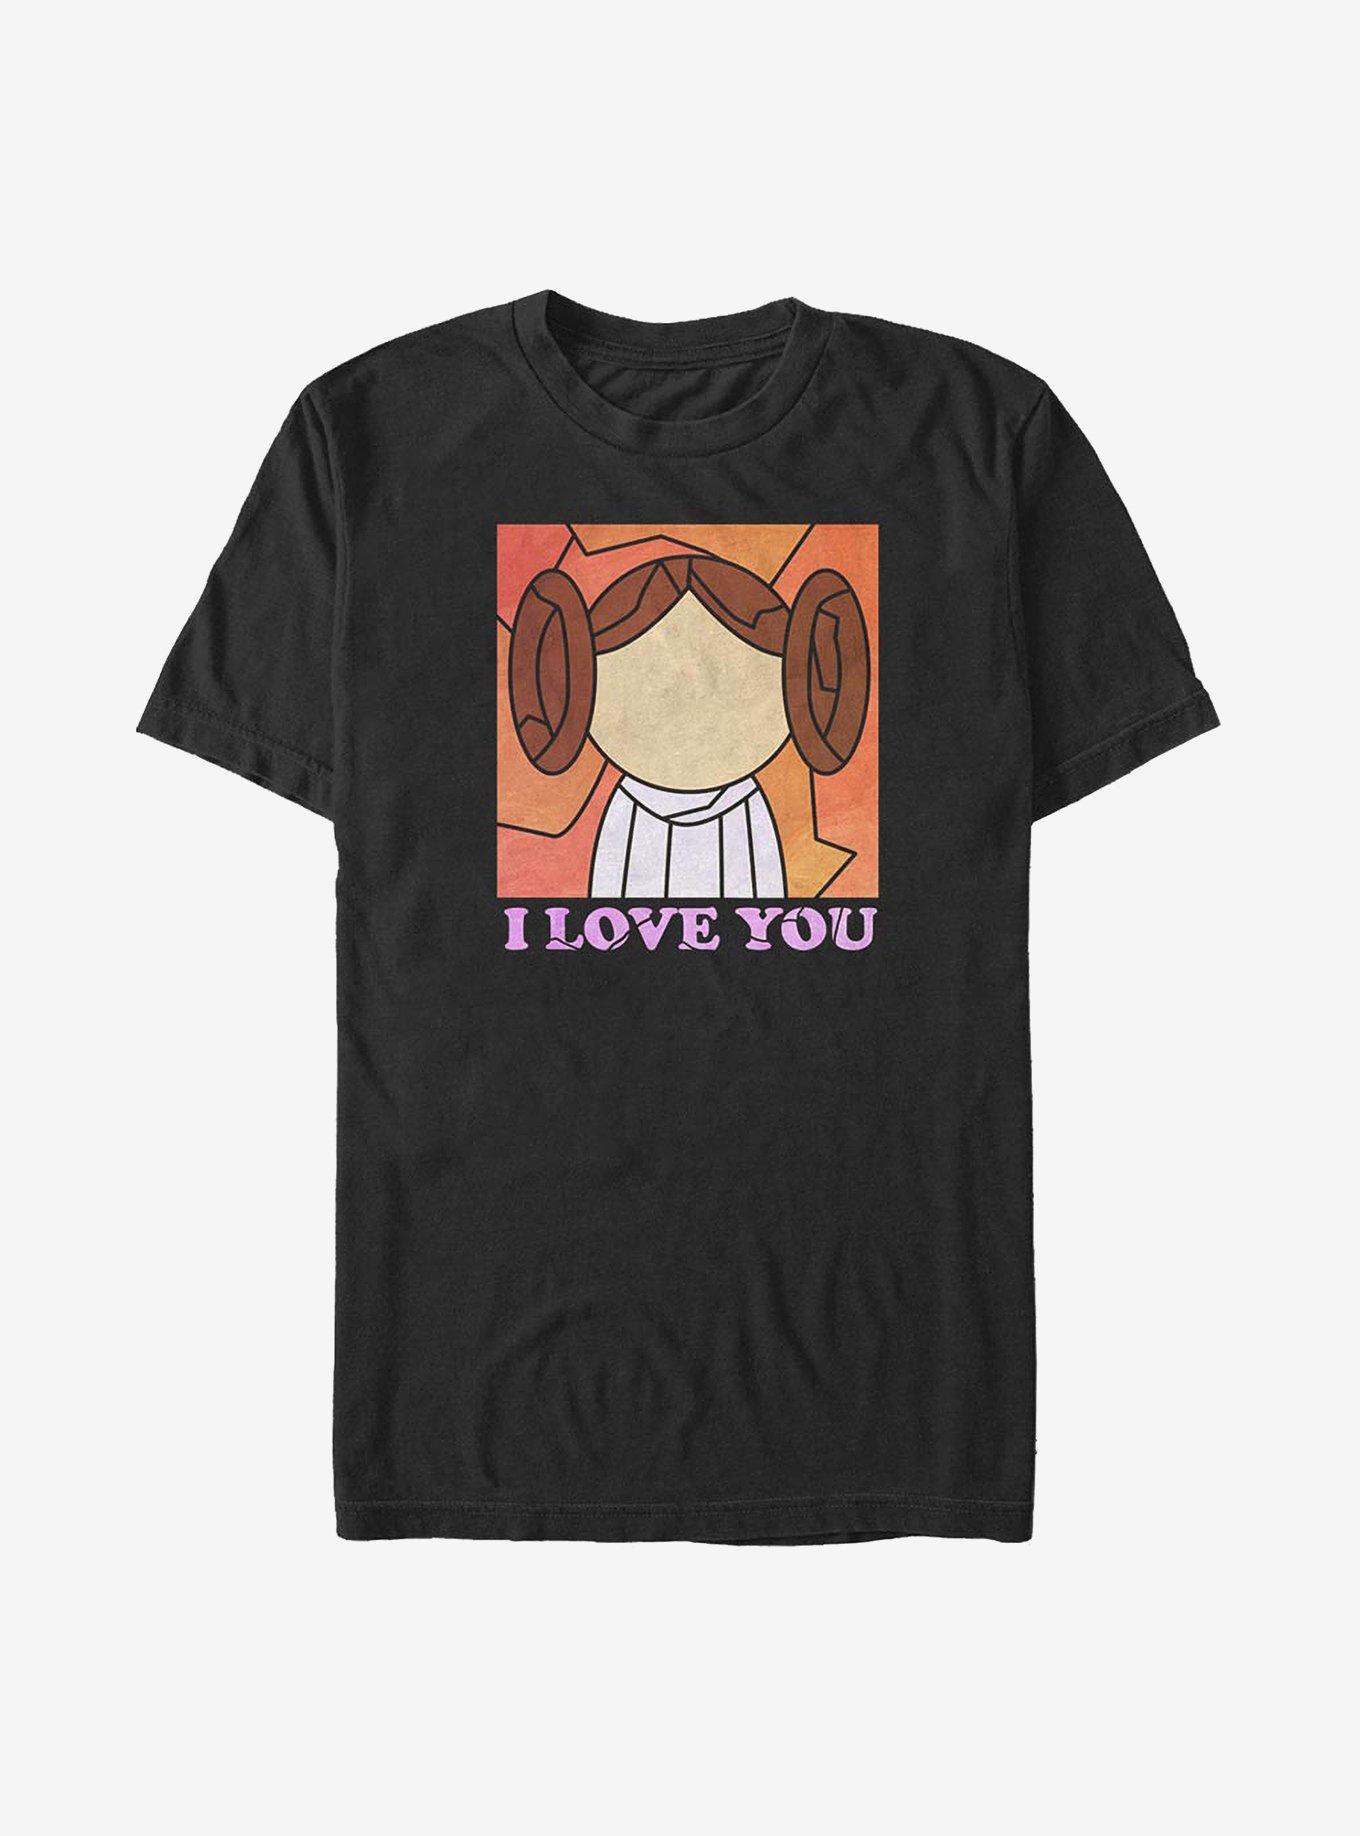 Star Wars I Love You Stained Glass T-Shirt, BLACK, hi-res